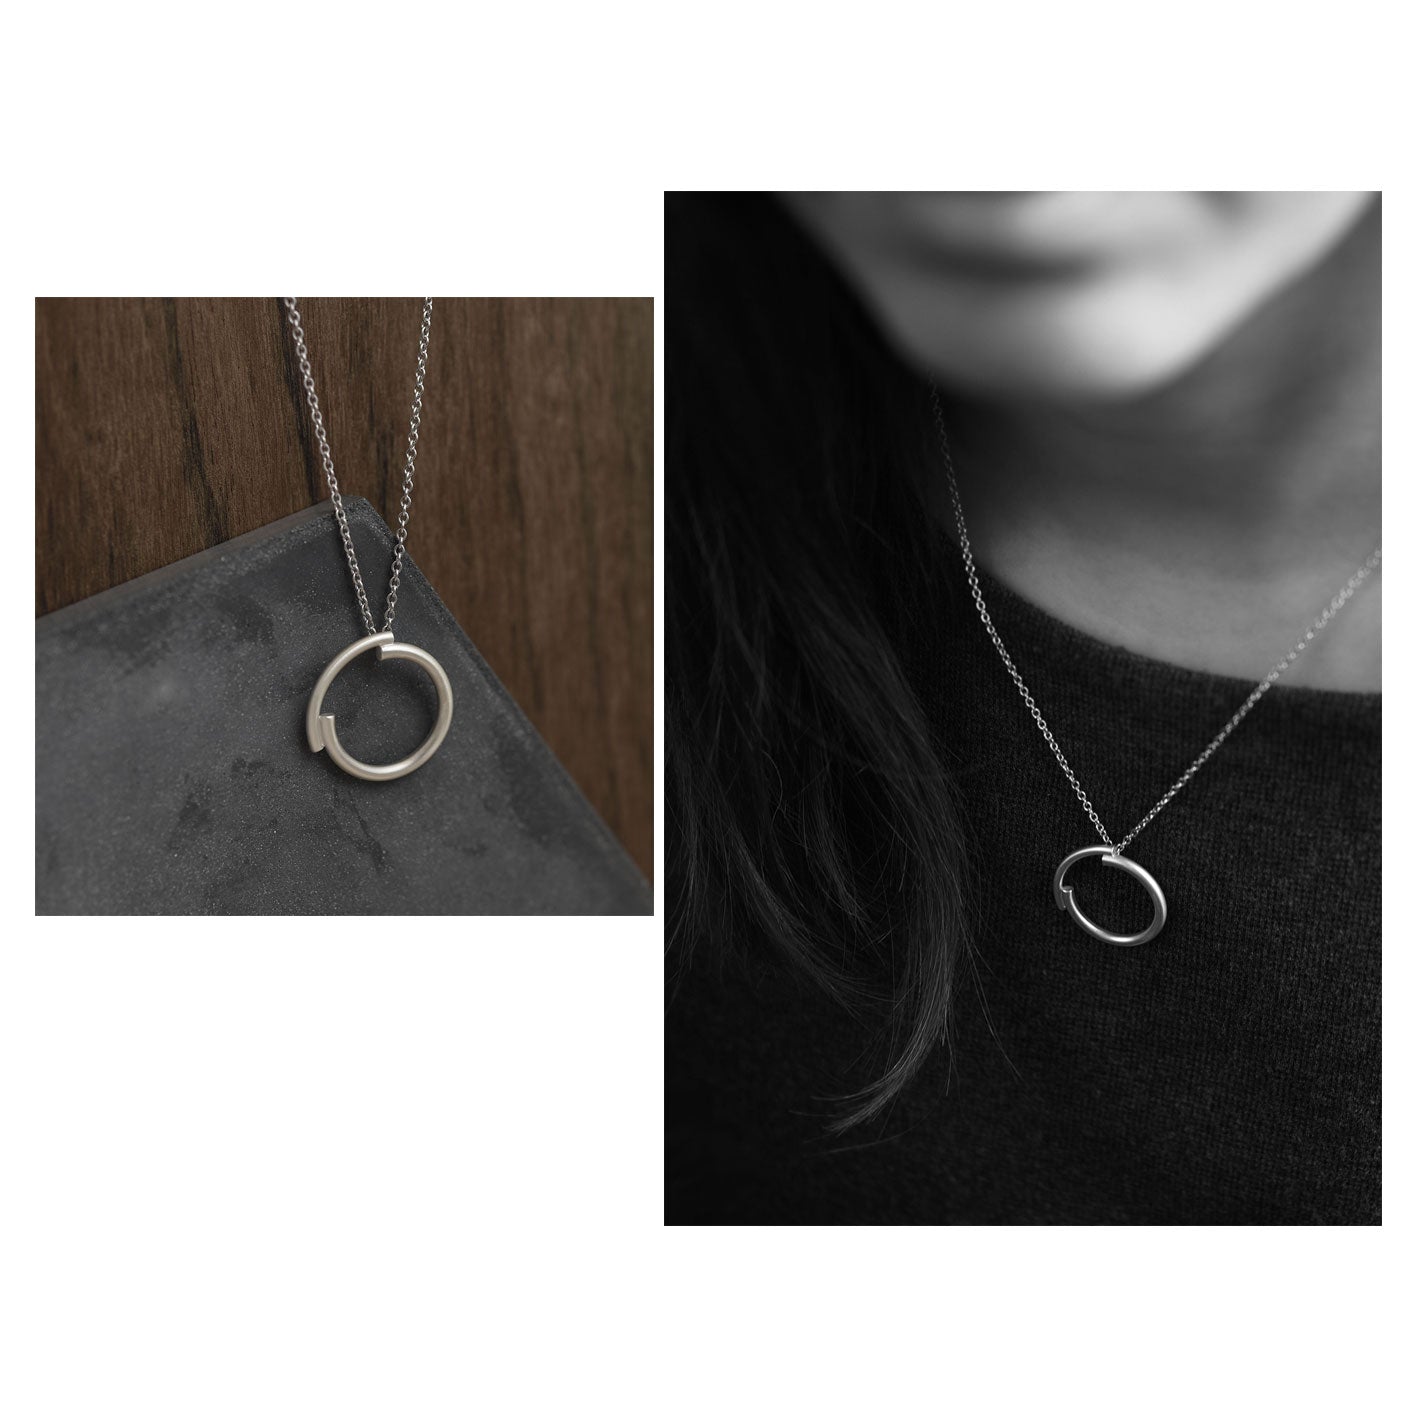 Set of Concentric circles pendant earrings, necklace and ring.